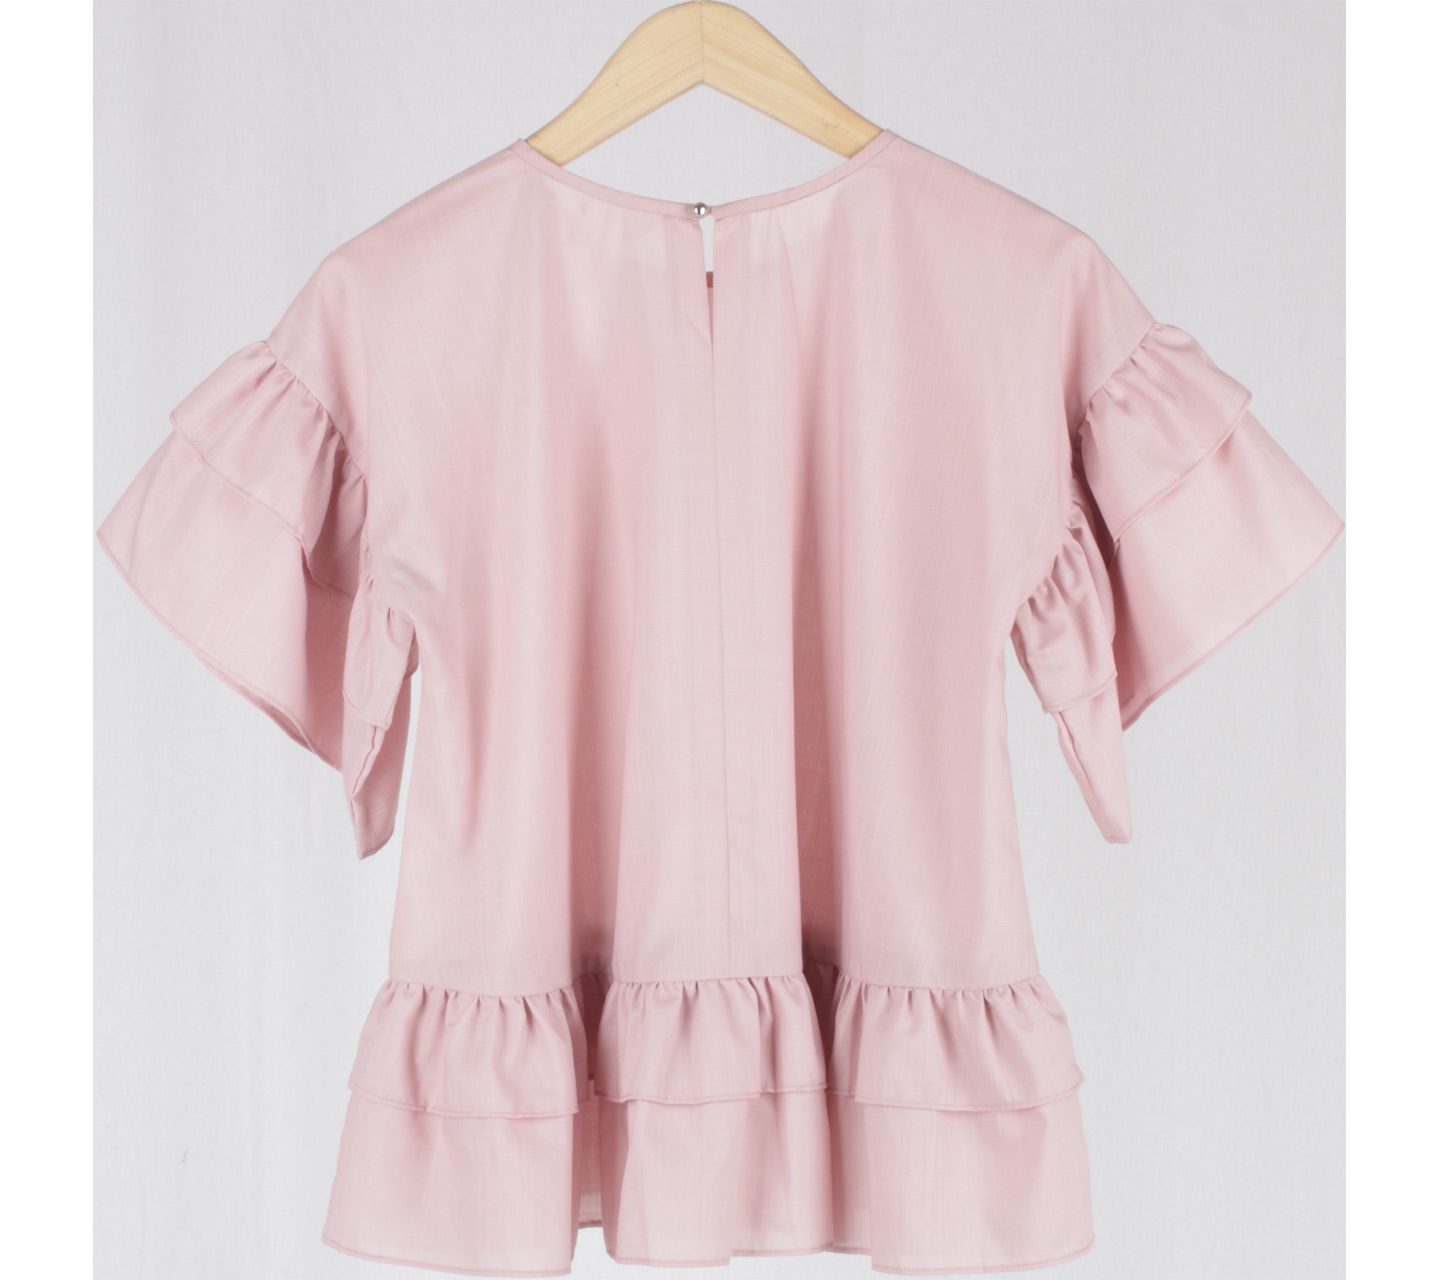 Krom Collective Pink Ruffle Blouse